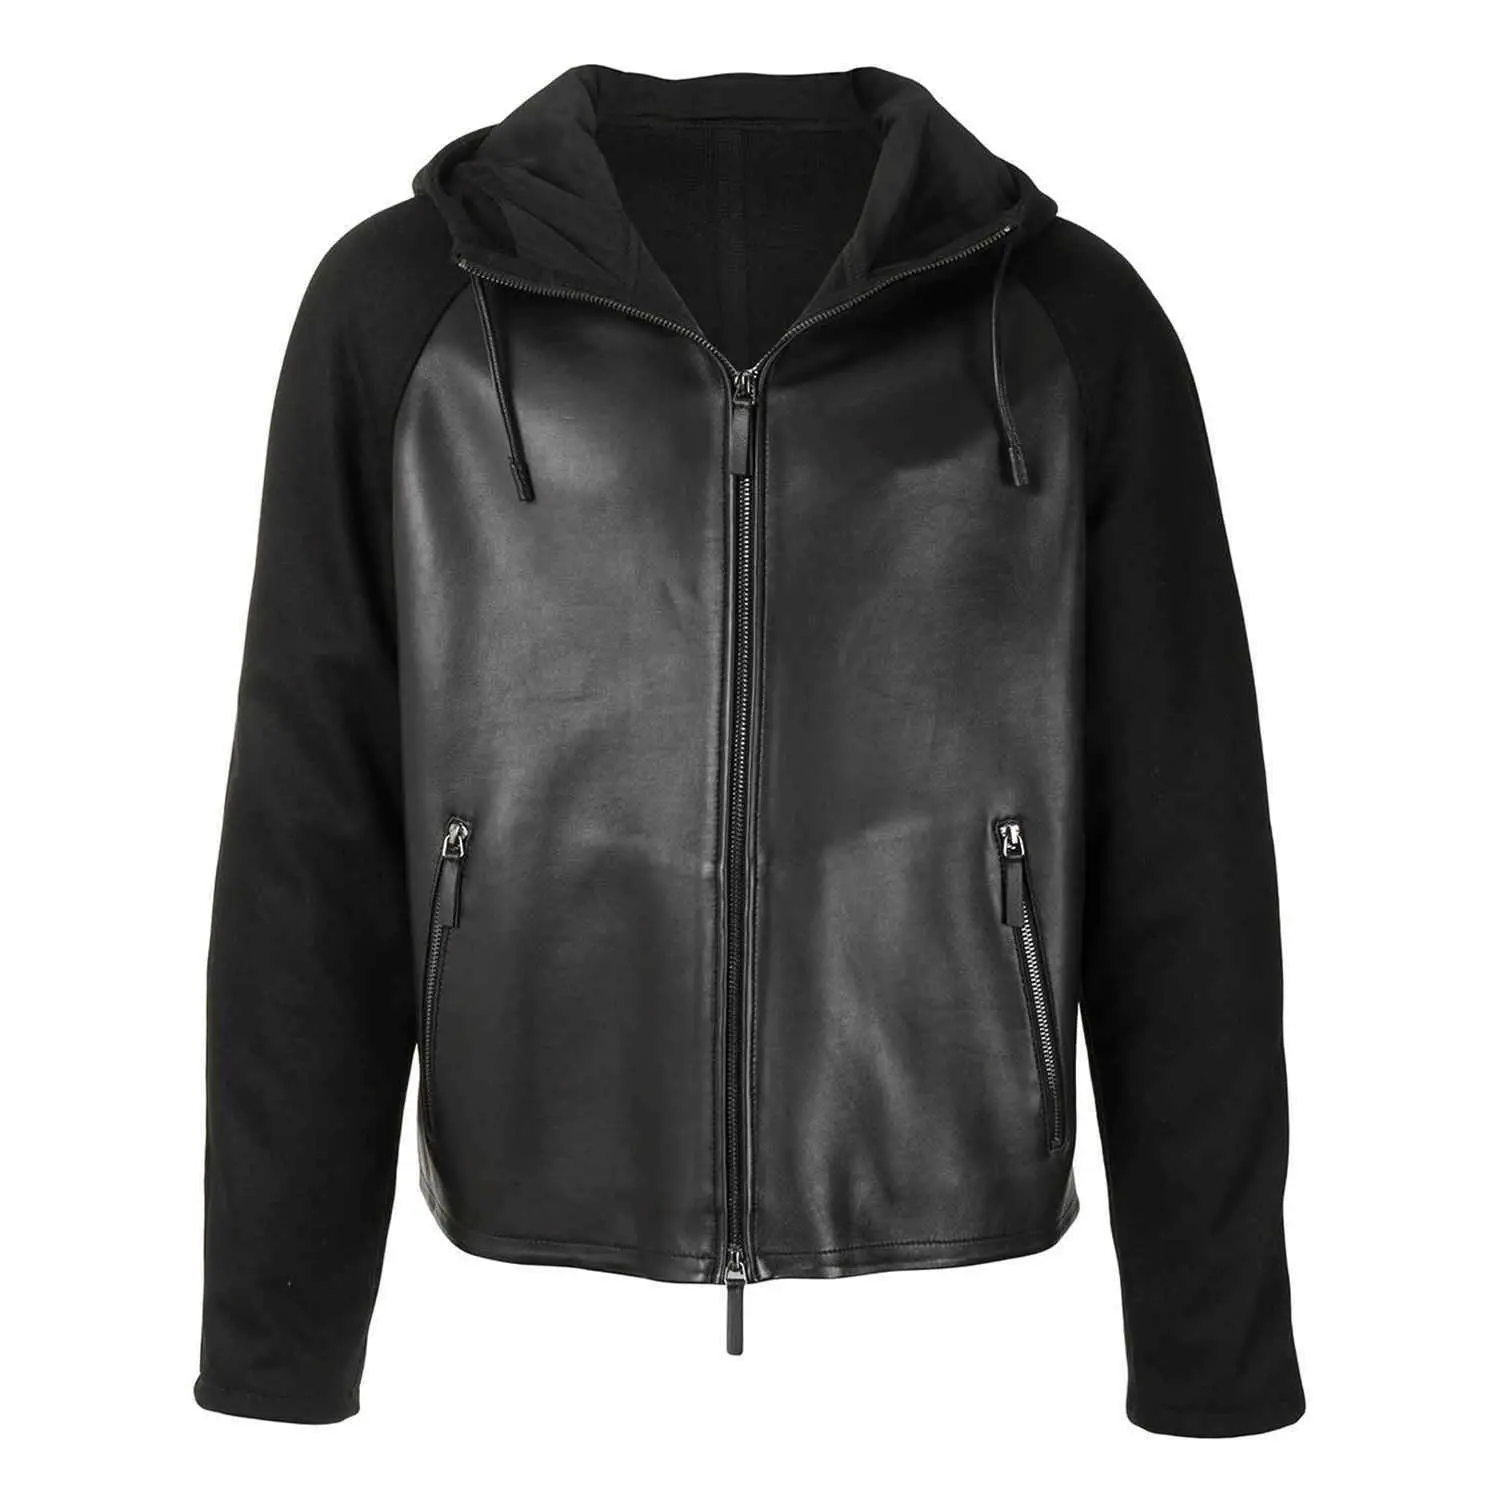 New Men's Leather Jackets Hooded Autumn Casual PU Jacket Leather Coats Brand Clothing Low Weight Unique